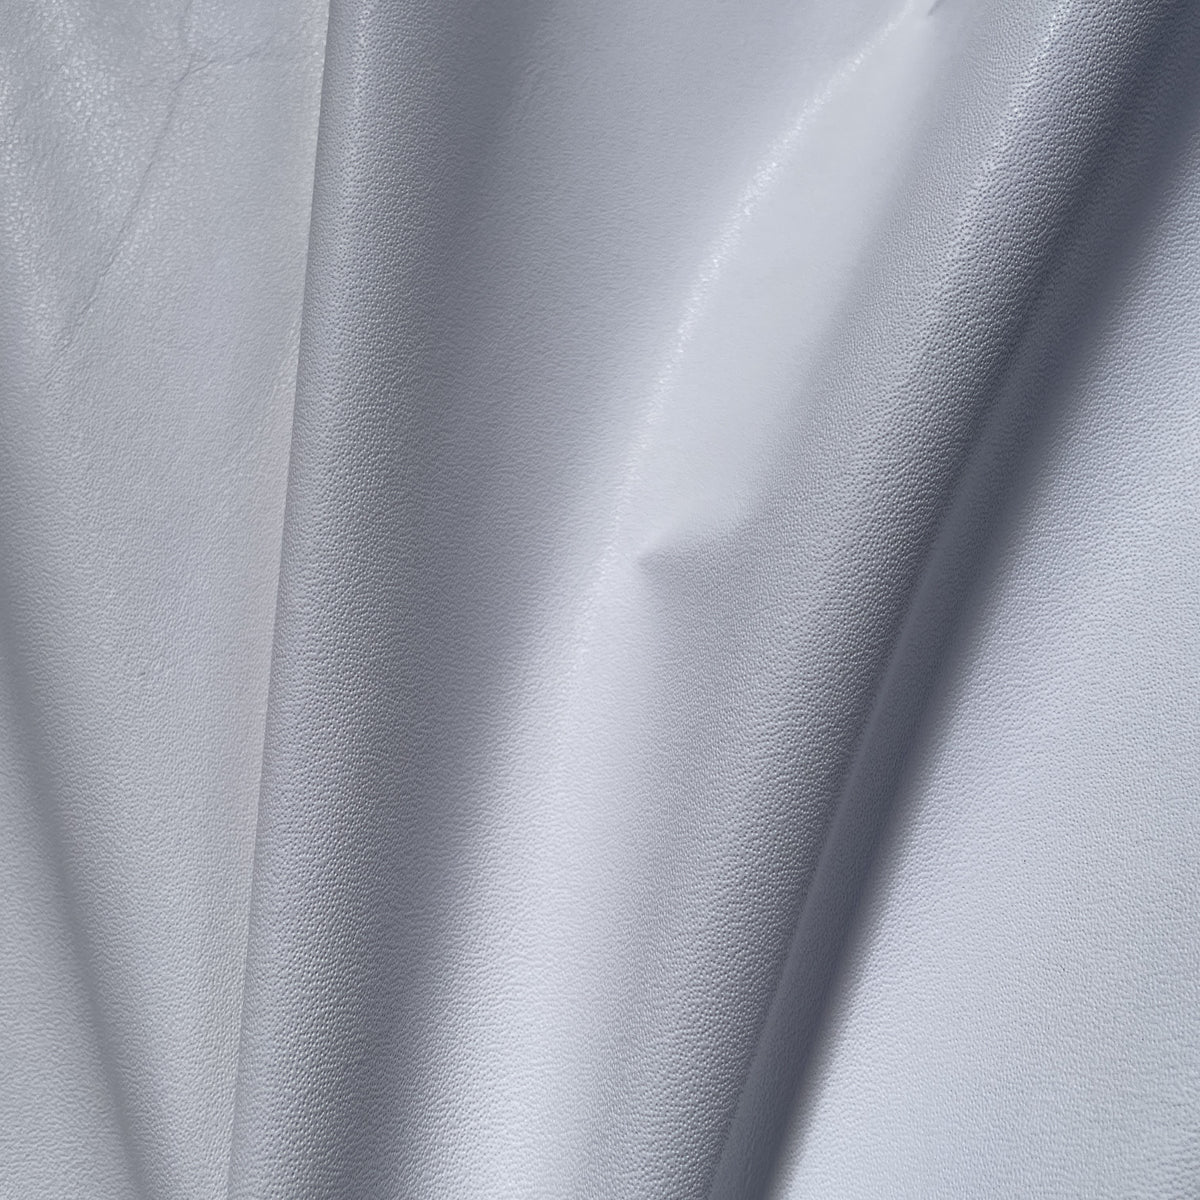 Milano Garment Cow Sides | White | 0.6 mm | 25 sq.ft | From $230 ea.